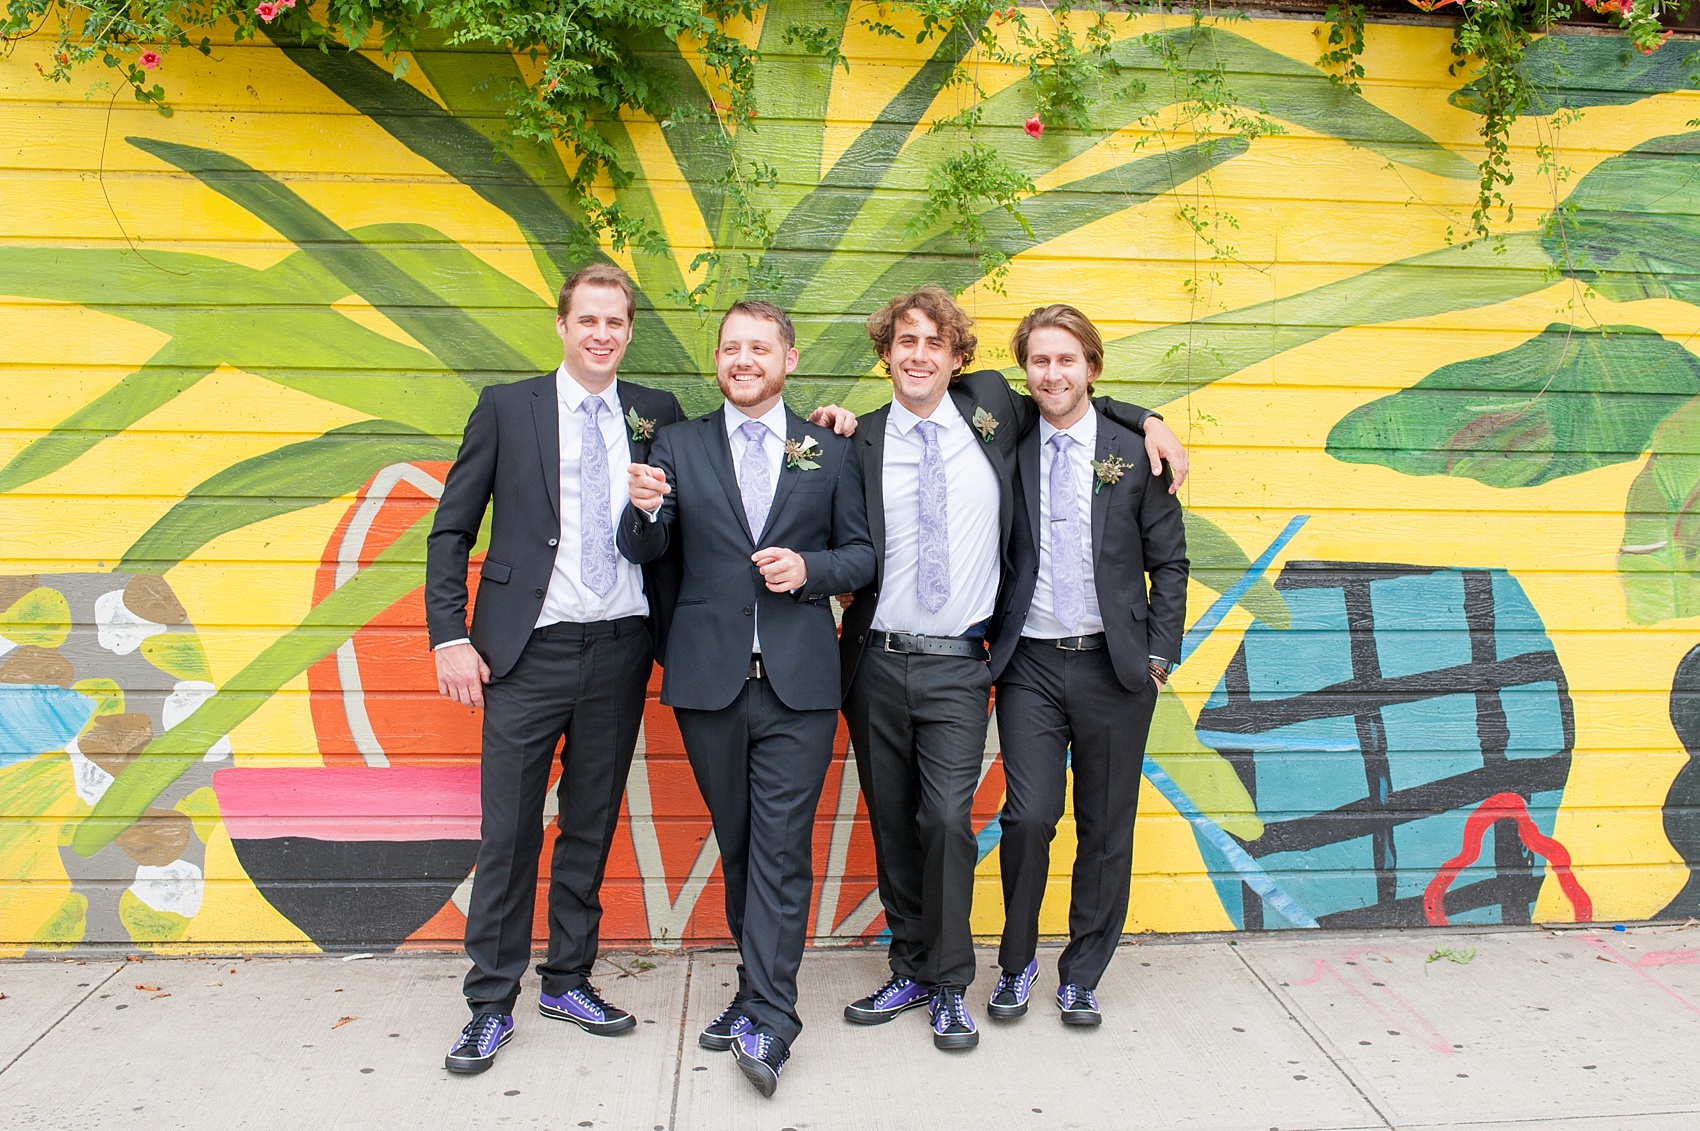 Mikkel Paige Photography photos of a NYC wedding at Tribeca Rooftop. An image of the groom and his groomsmen against a mural near The James Hotel.